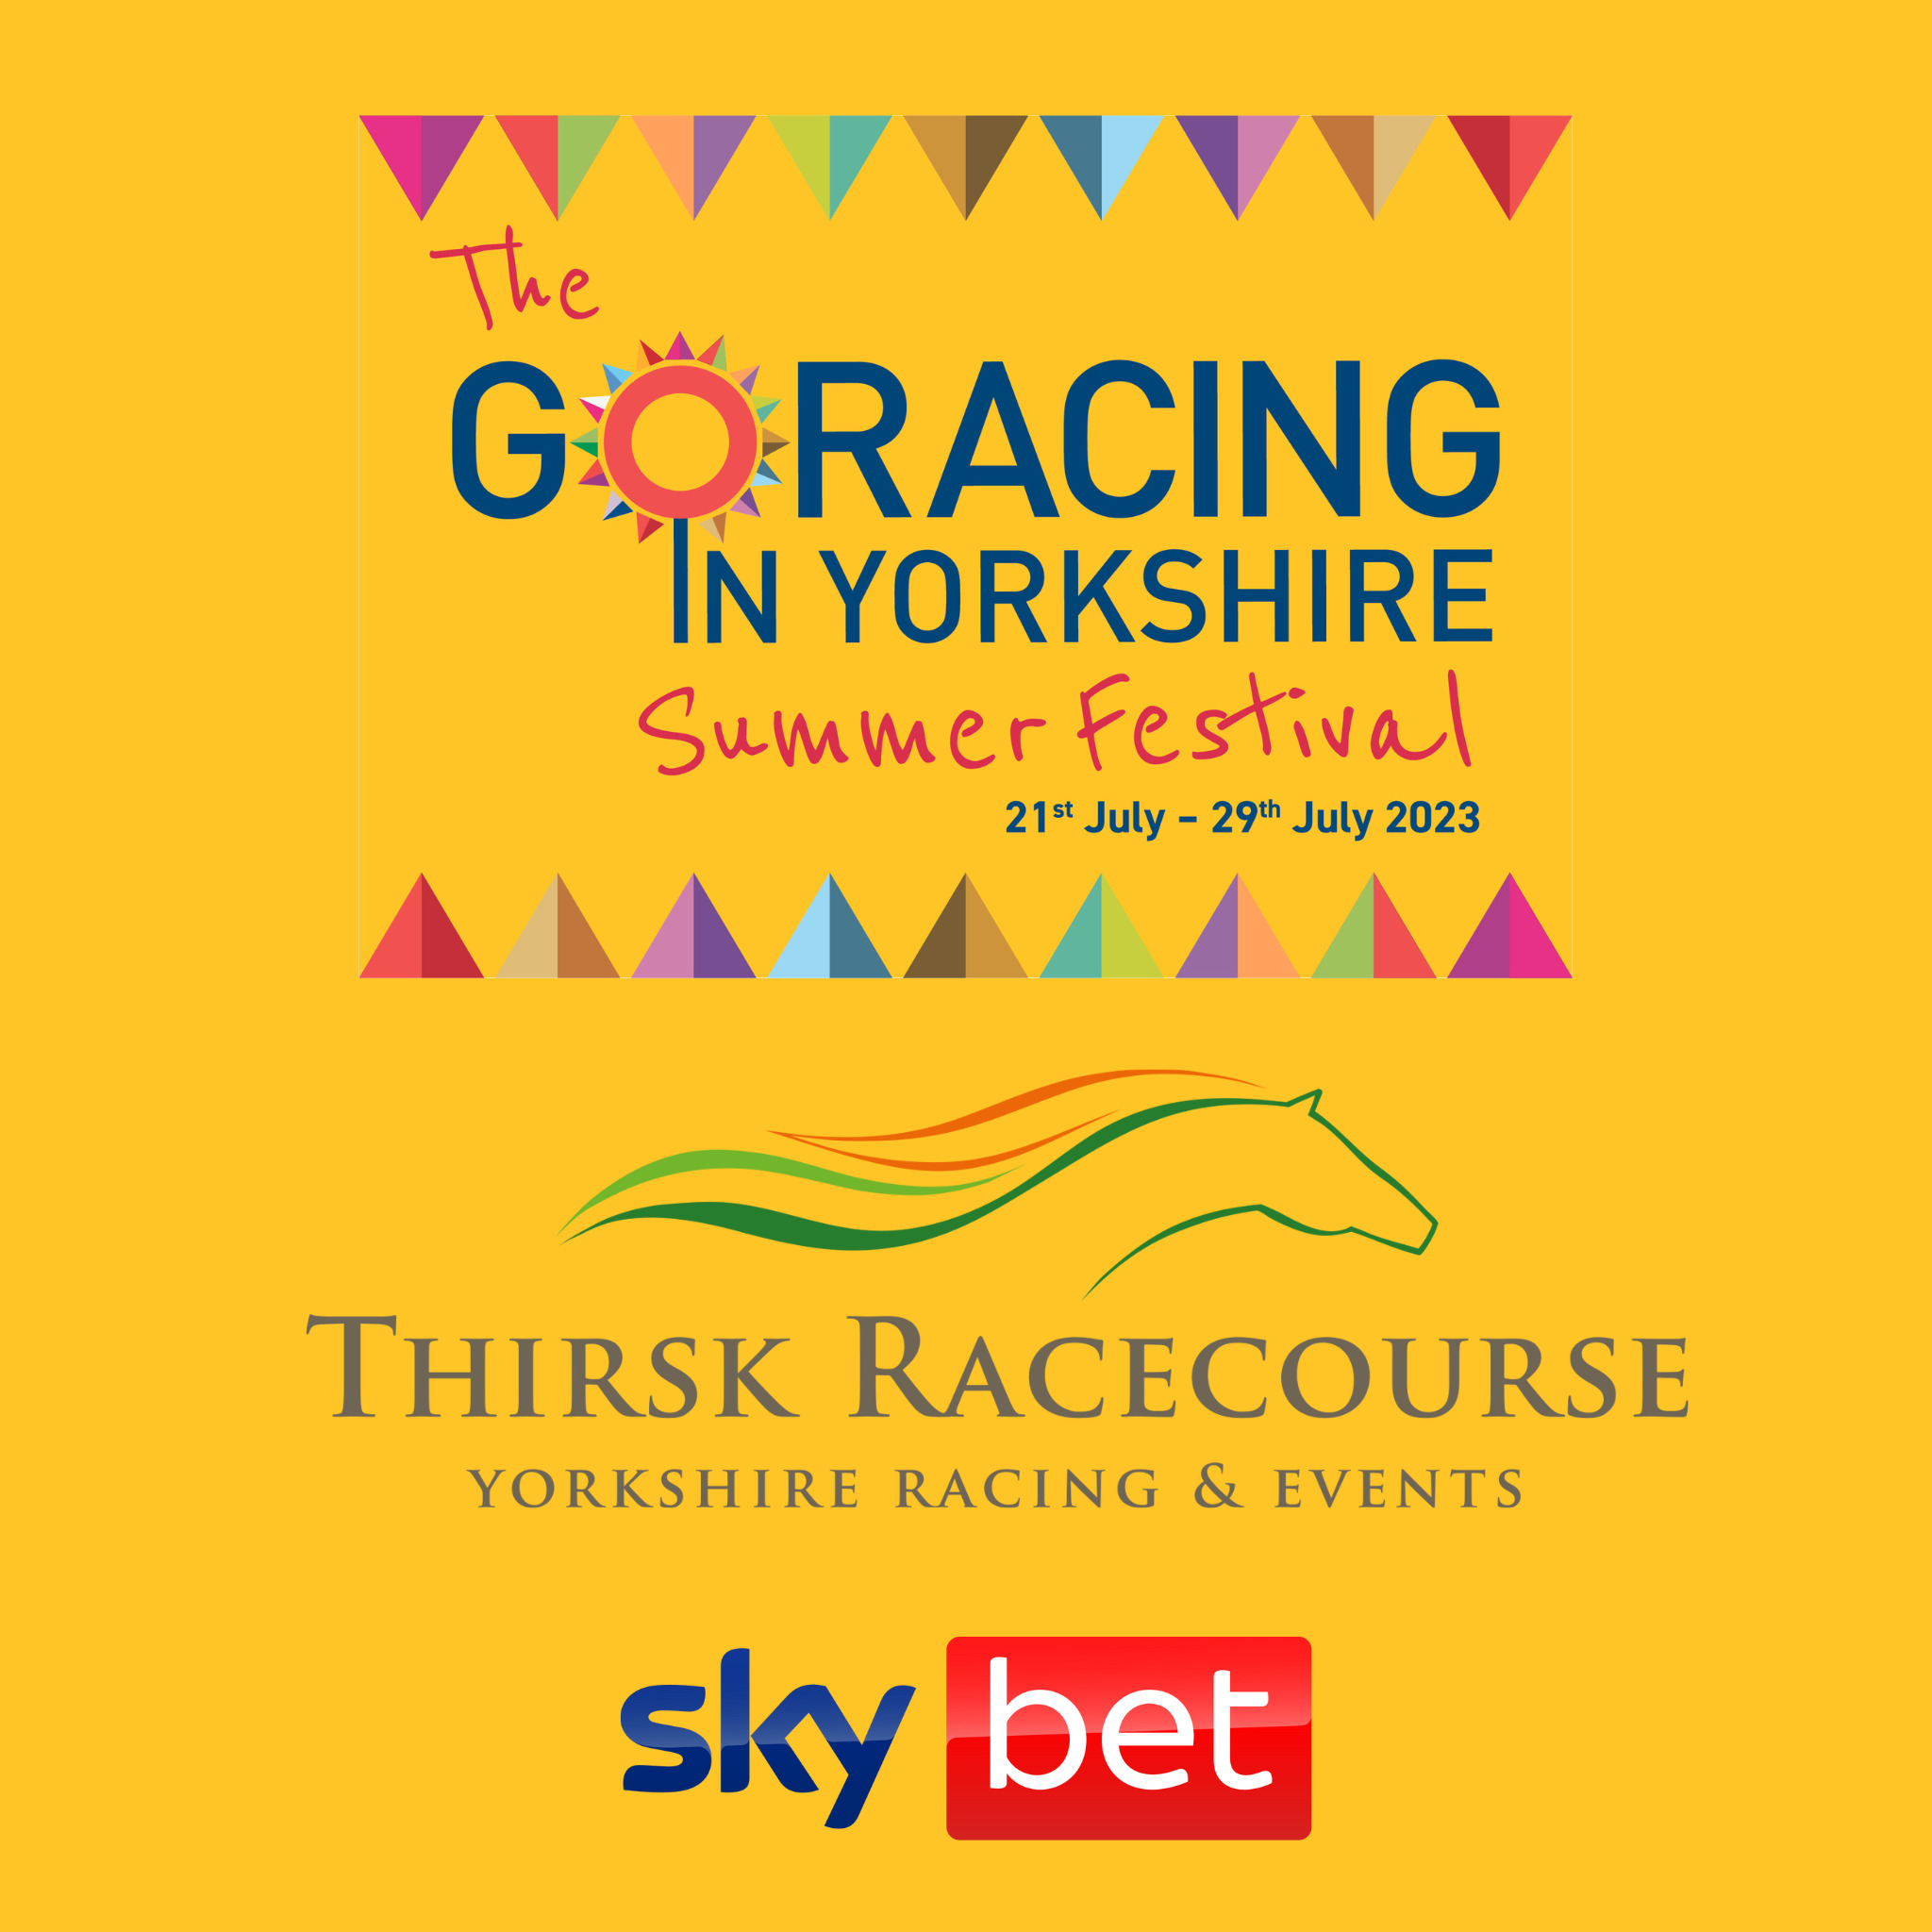 Press Release ahead of the Go Racing In Yorkshire Summer Festival